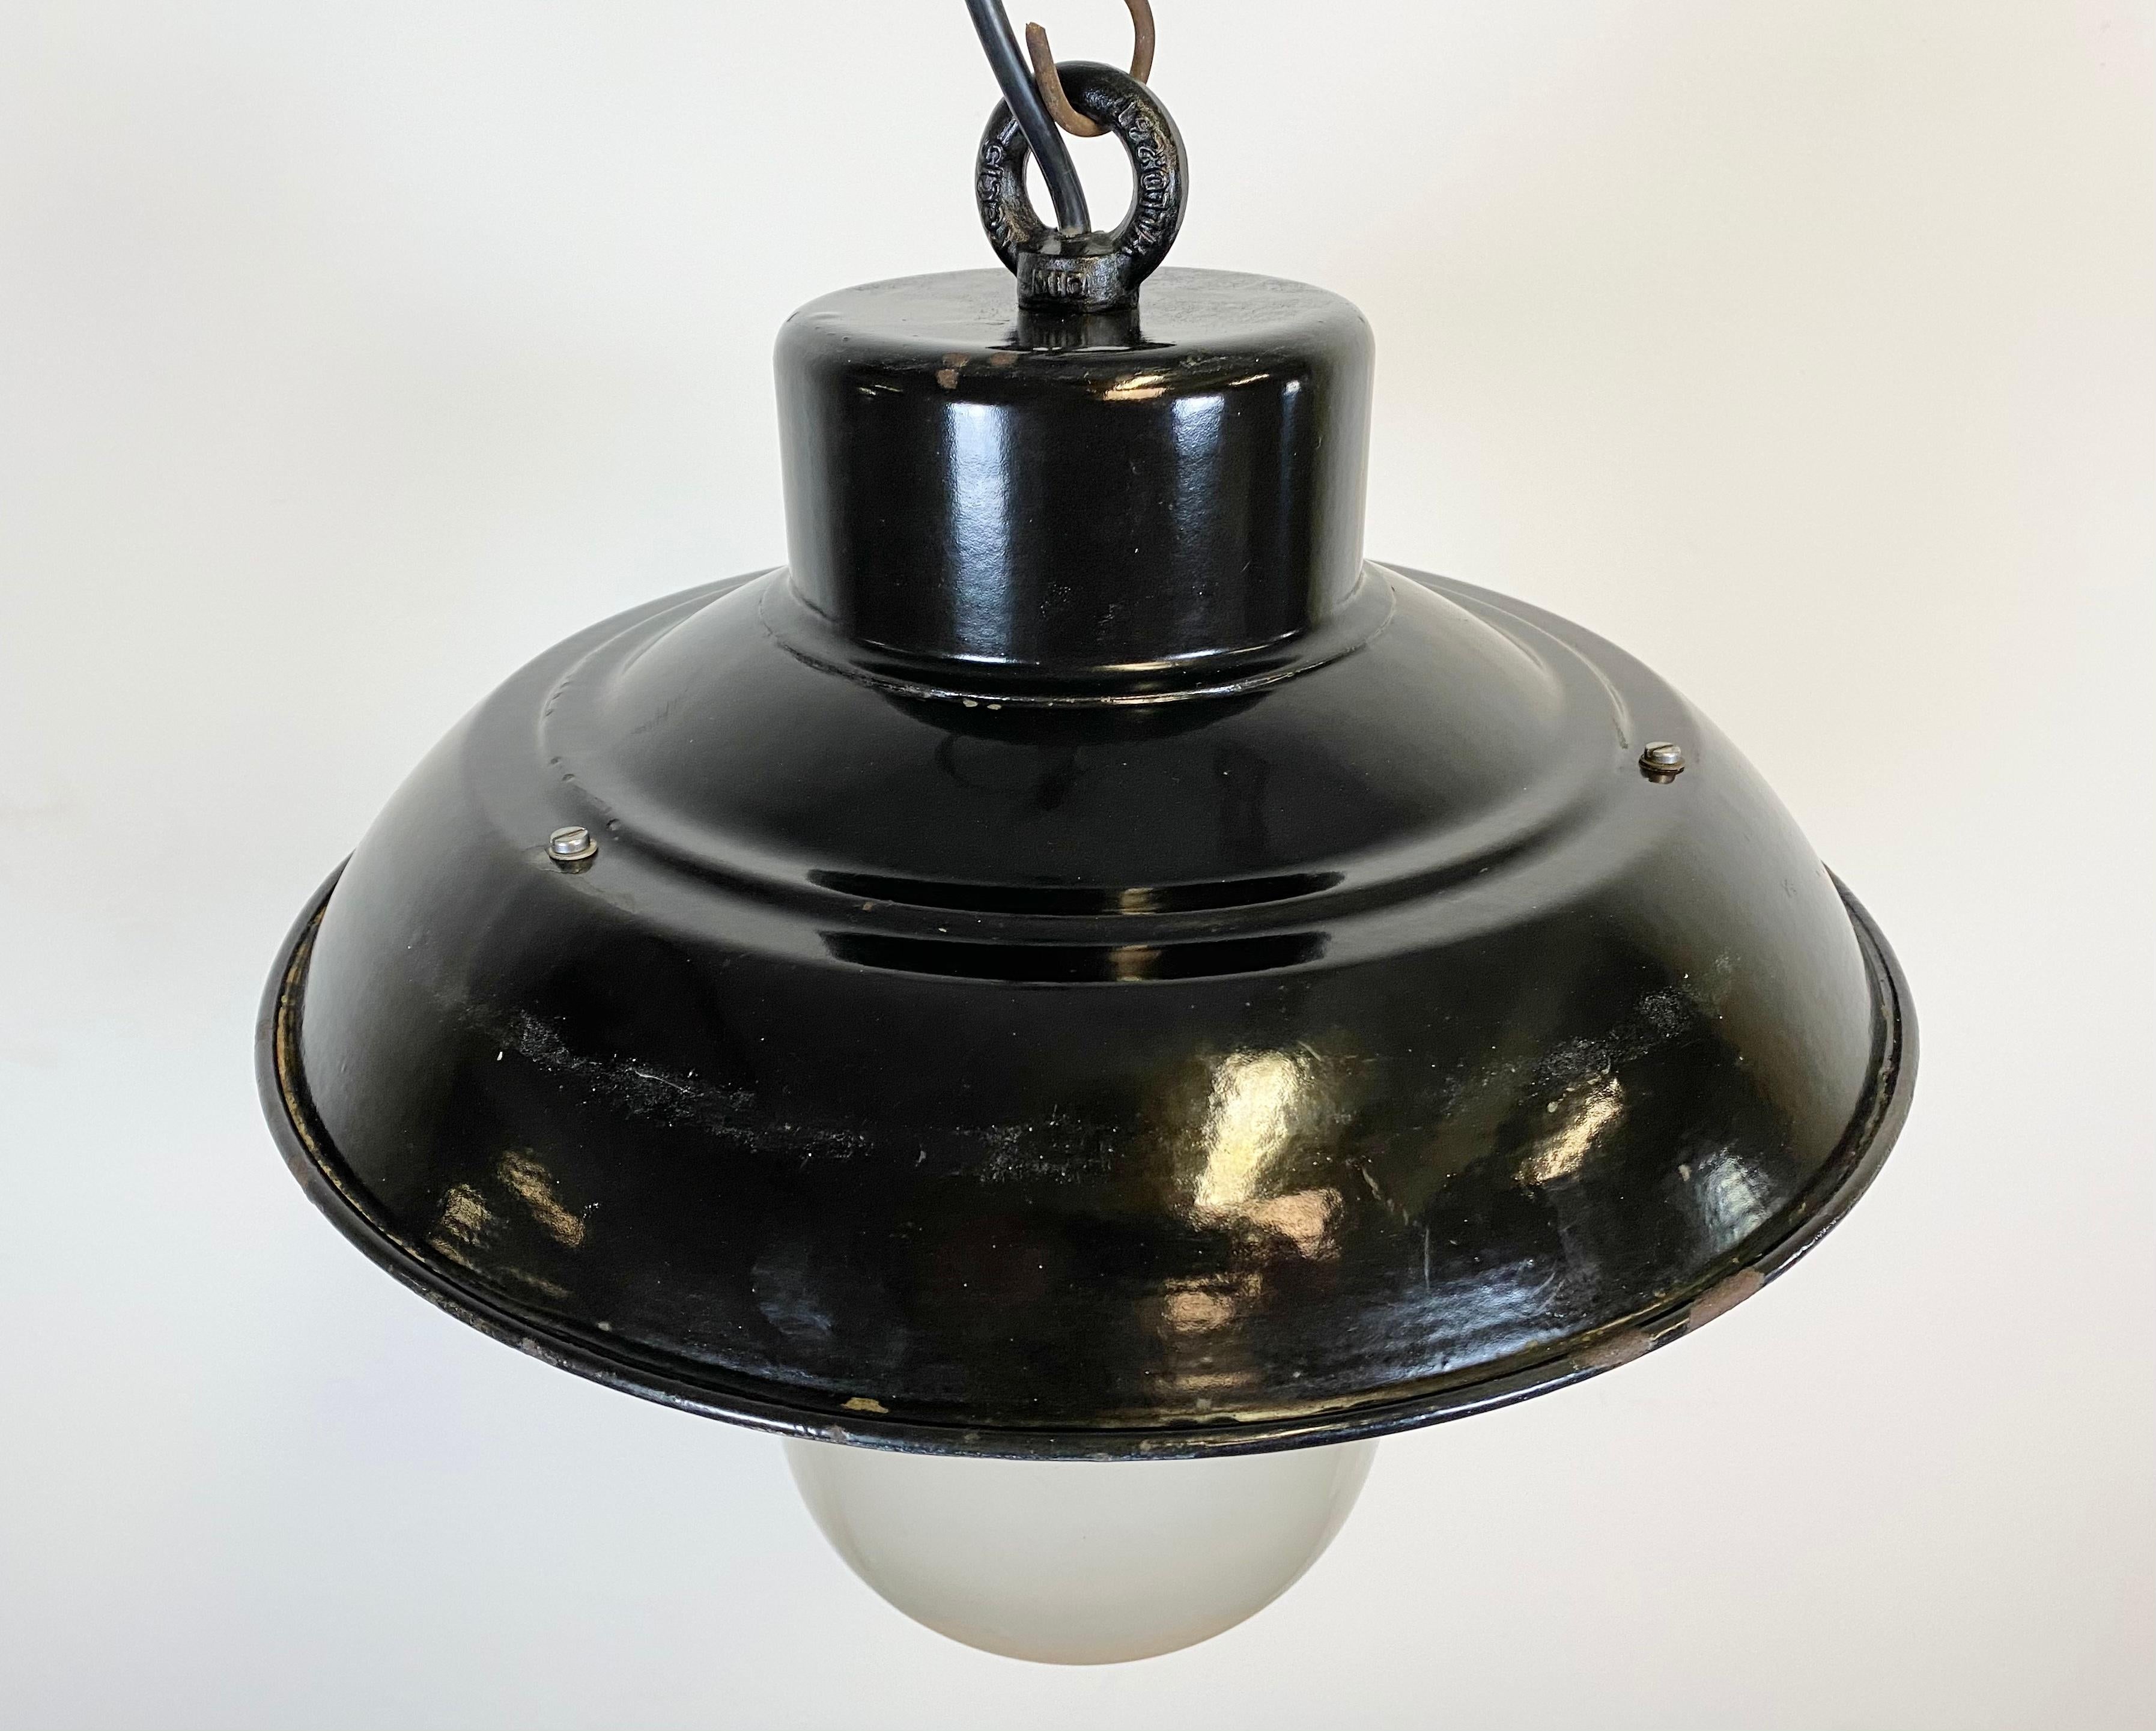 - Vintage Industrial lamp from the 1960s 
- Black enamel shade, white interior 
- Milk glass 
- Weight: 4 kg 
- New porcelain socket for E 27 lightbulbs and wire 
- Lampshade diameter: 36 cm.